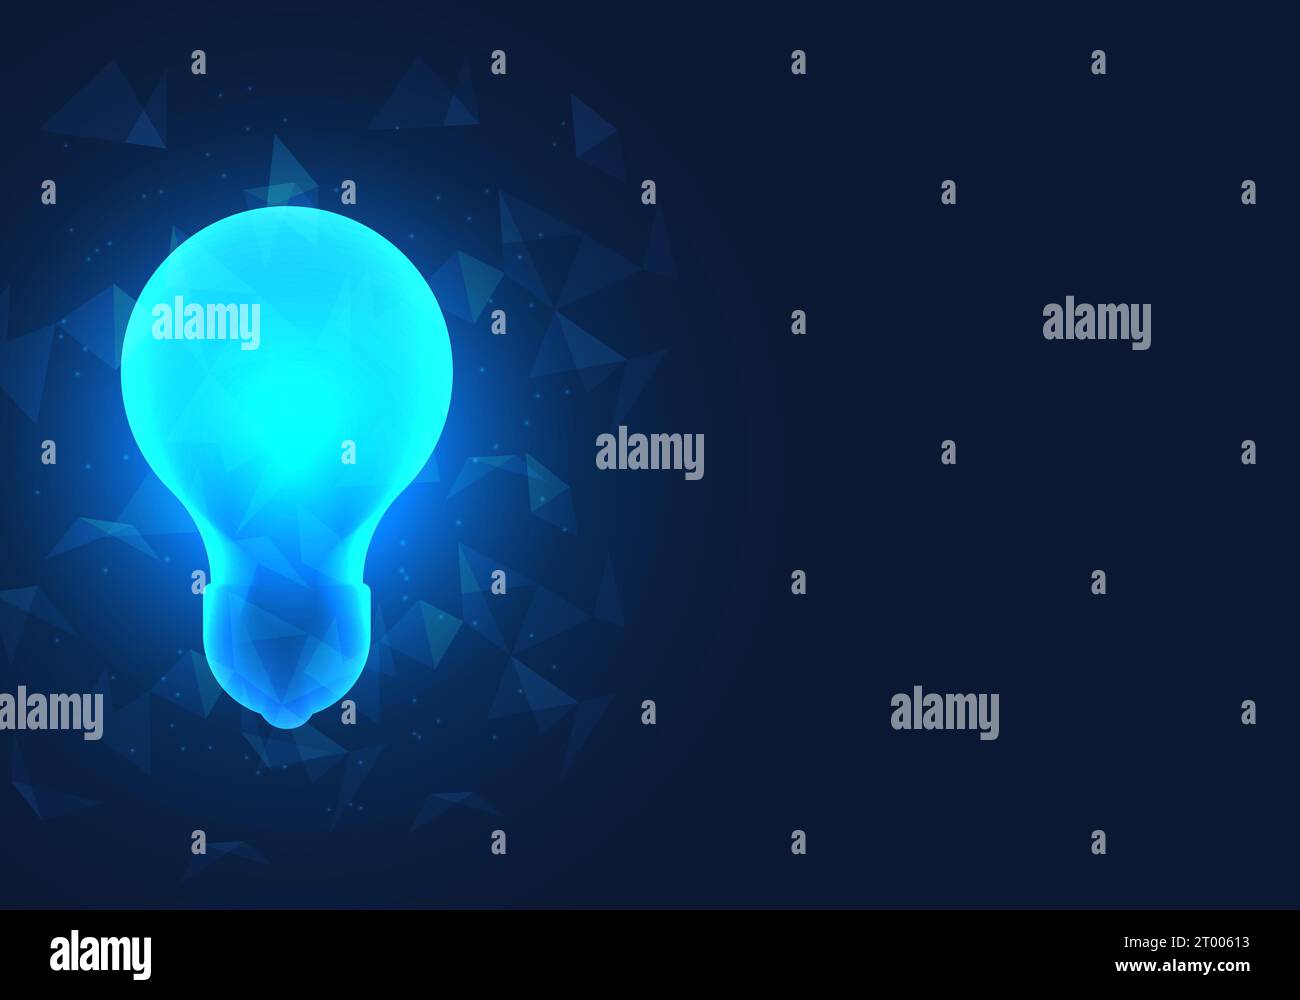 Background technology light bulb means coming up with creative ideas, starting a new business, or solving work problems that arise to get through a cr Stock Vector